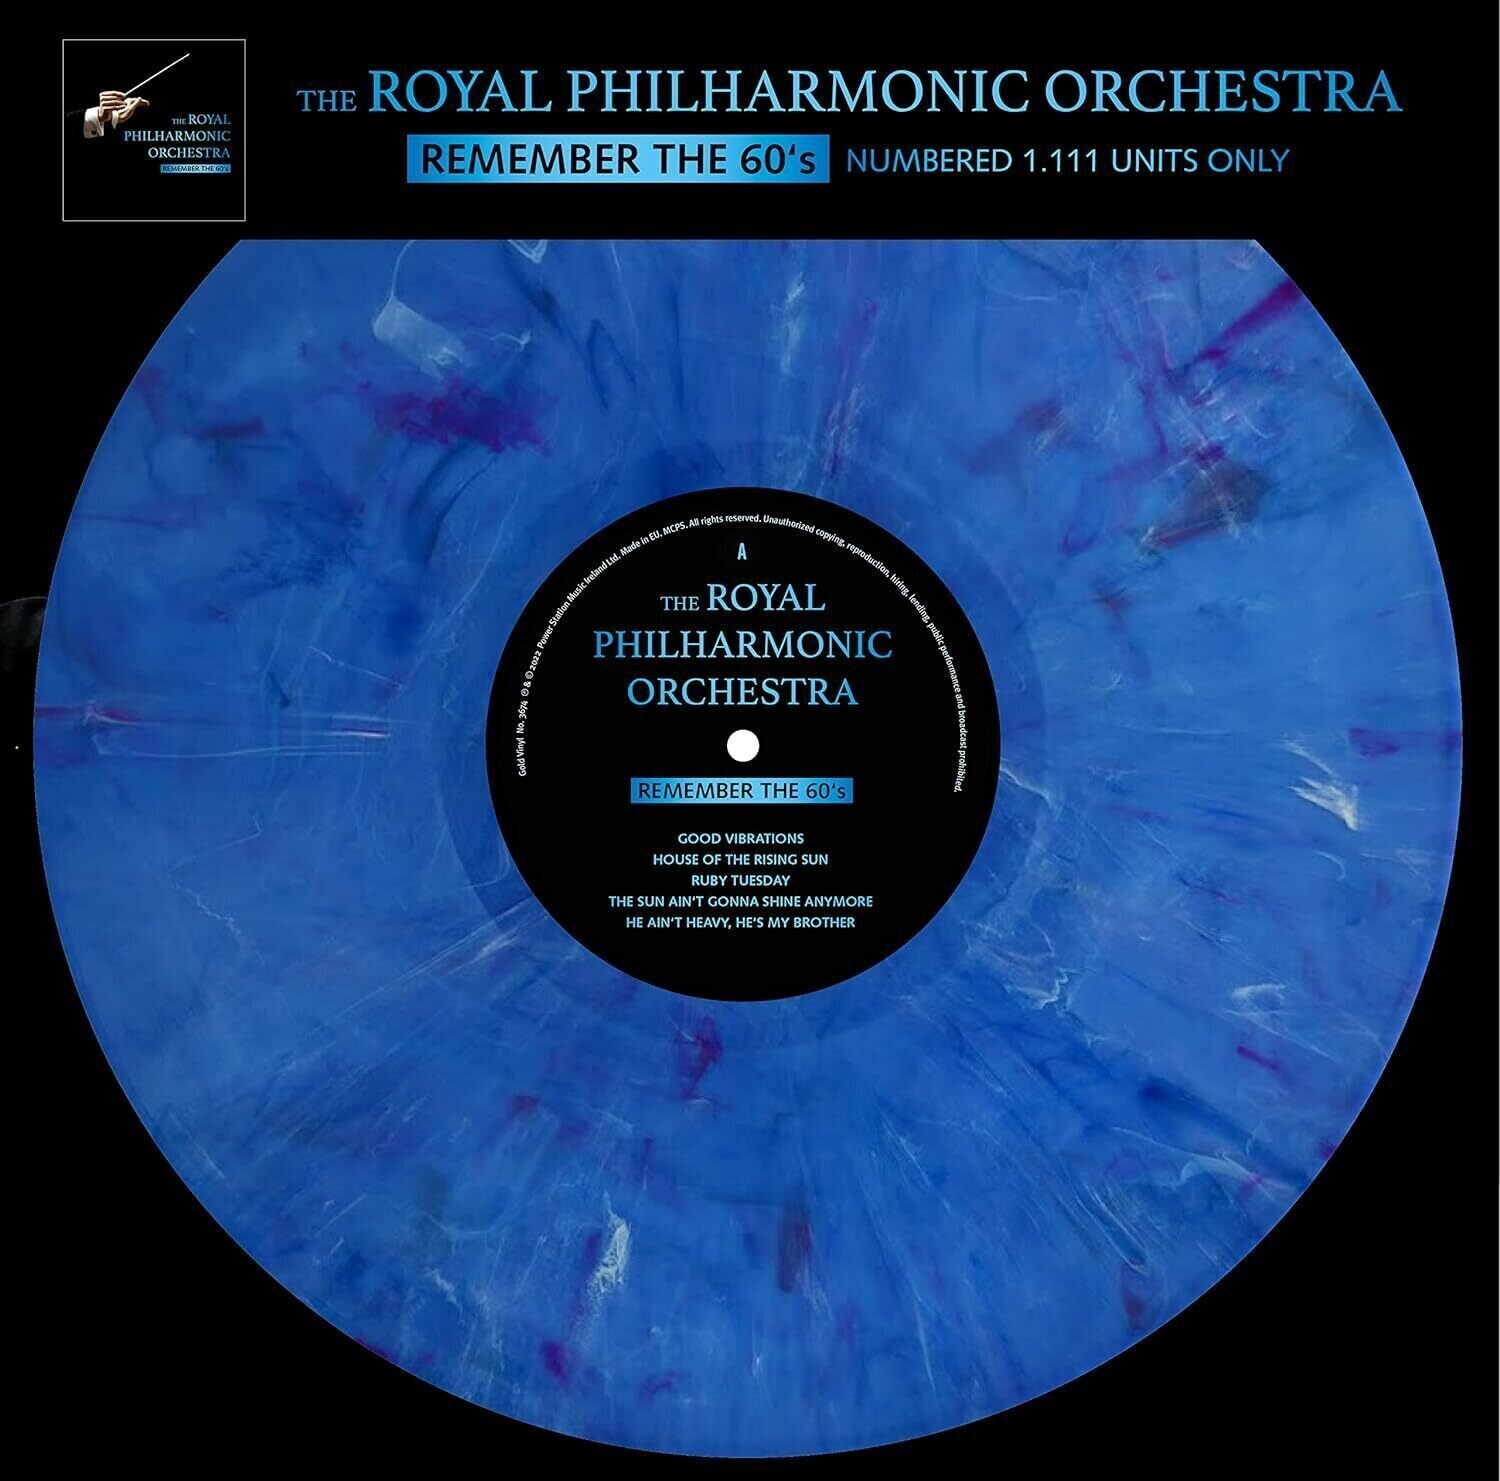 Vinylplade Royal Philharmonic Orchestra - Remember The 60's (Limited Edition) (Numbered) (Marbled Coloured) (LP)